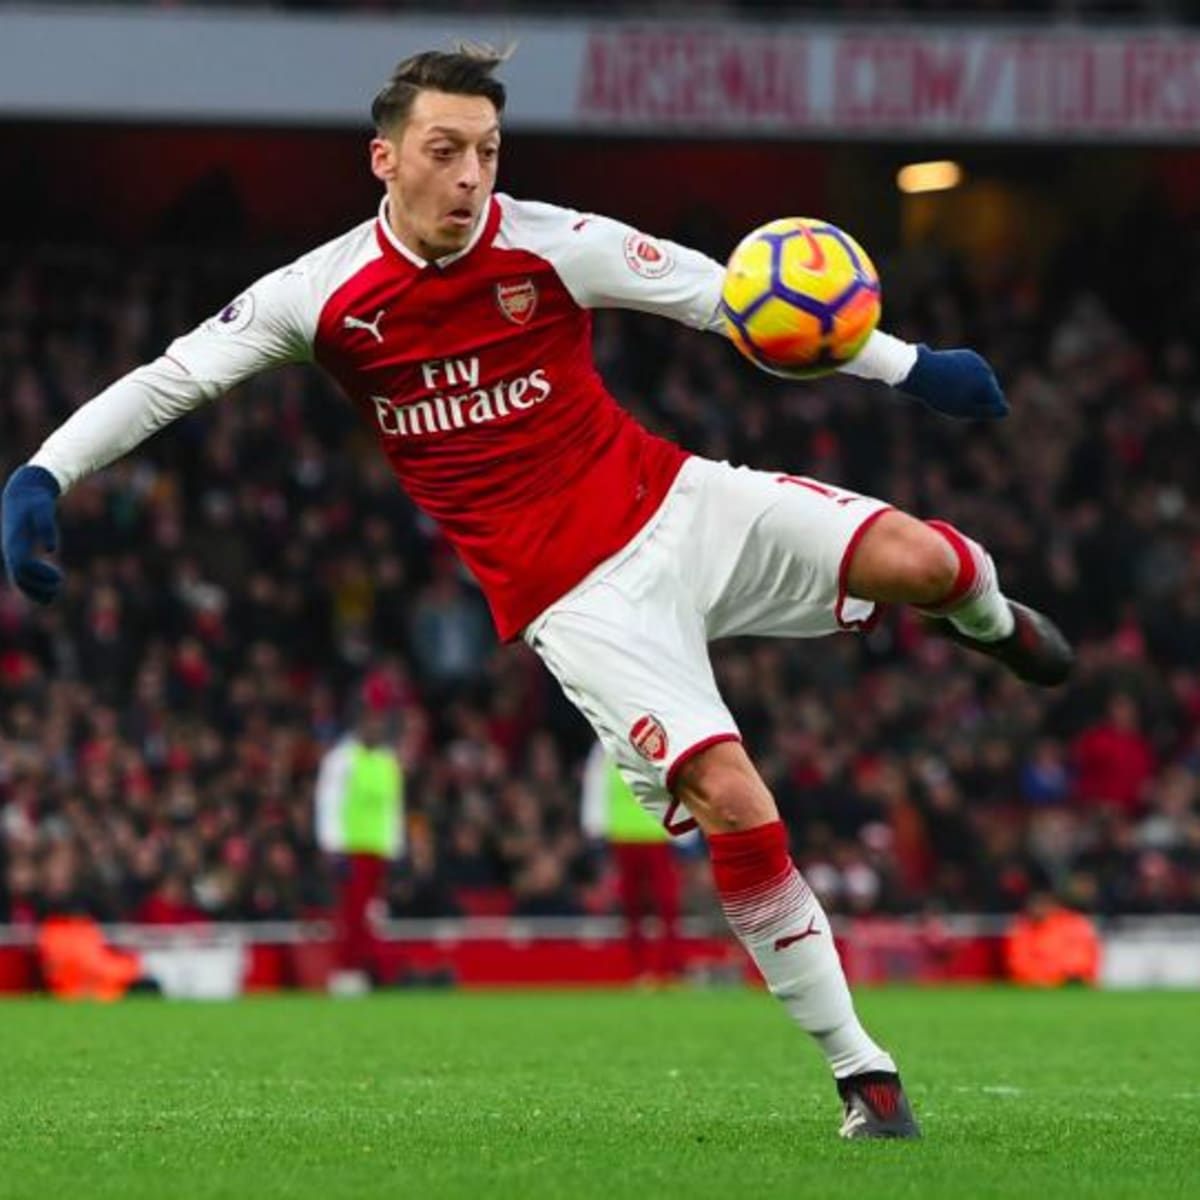 Arsenal vs Liverpool live stream Watch online, TV channel, time